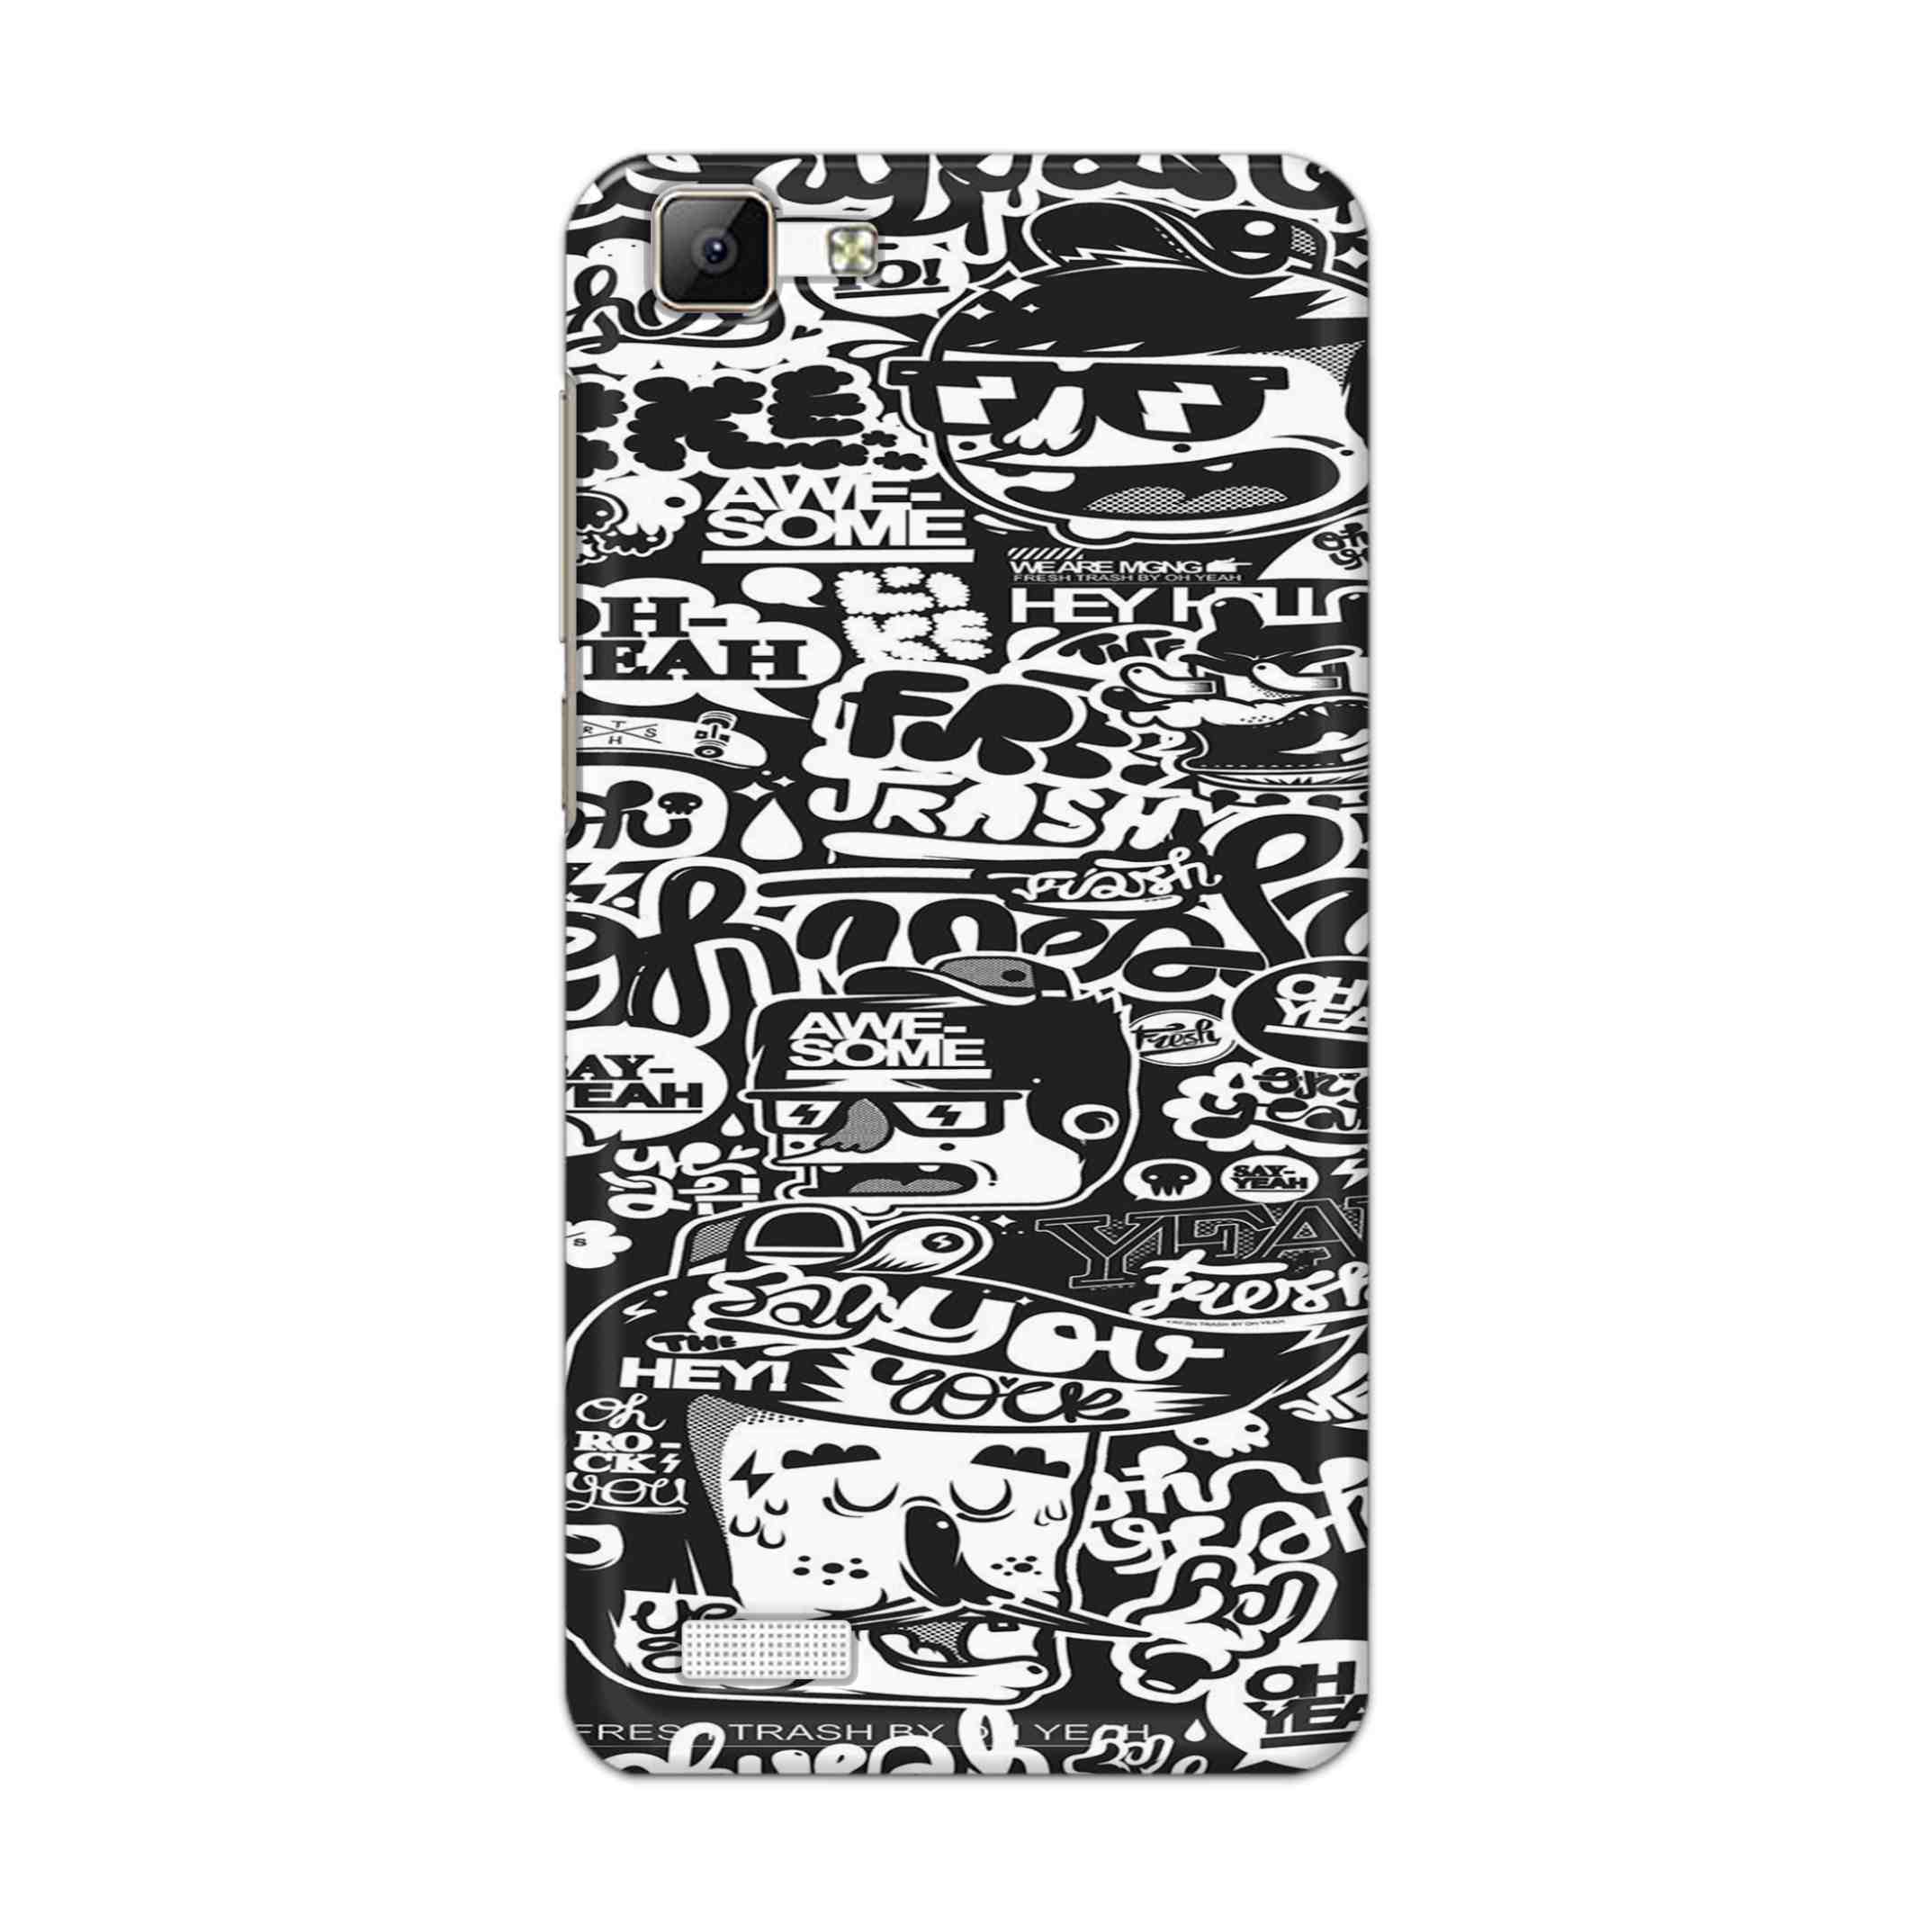 Buy Awesome Hard Back Mobile Phone Case Cover For Vivo Y35 Online